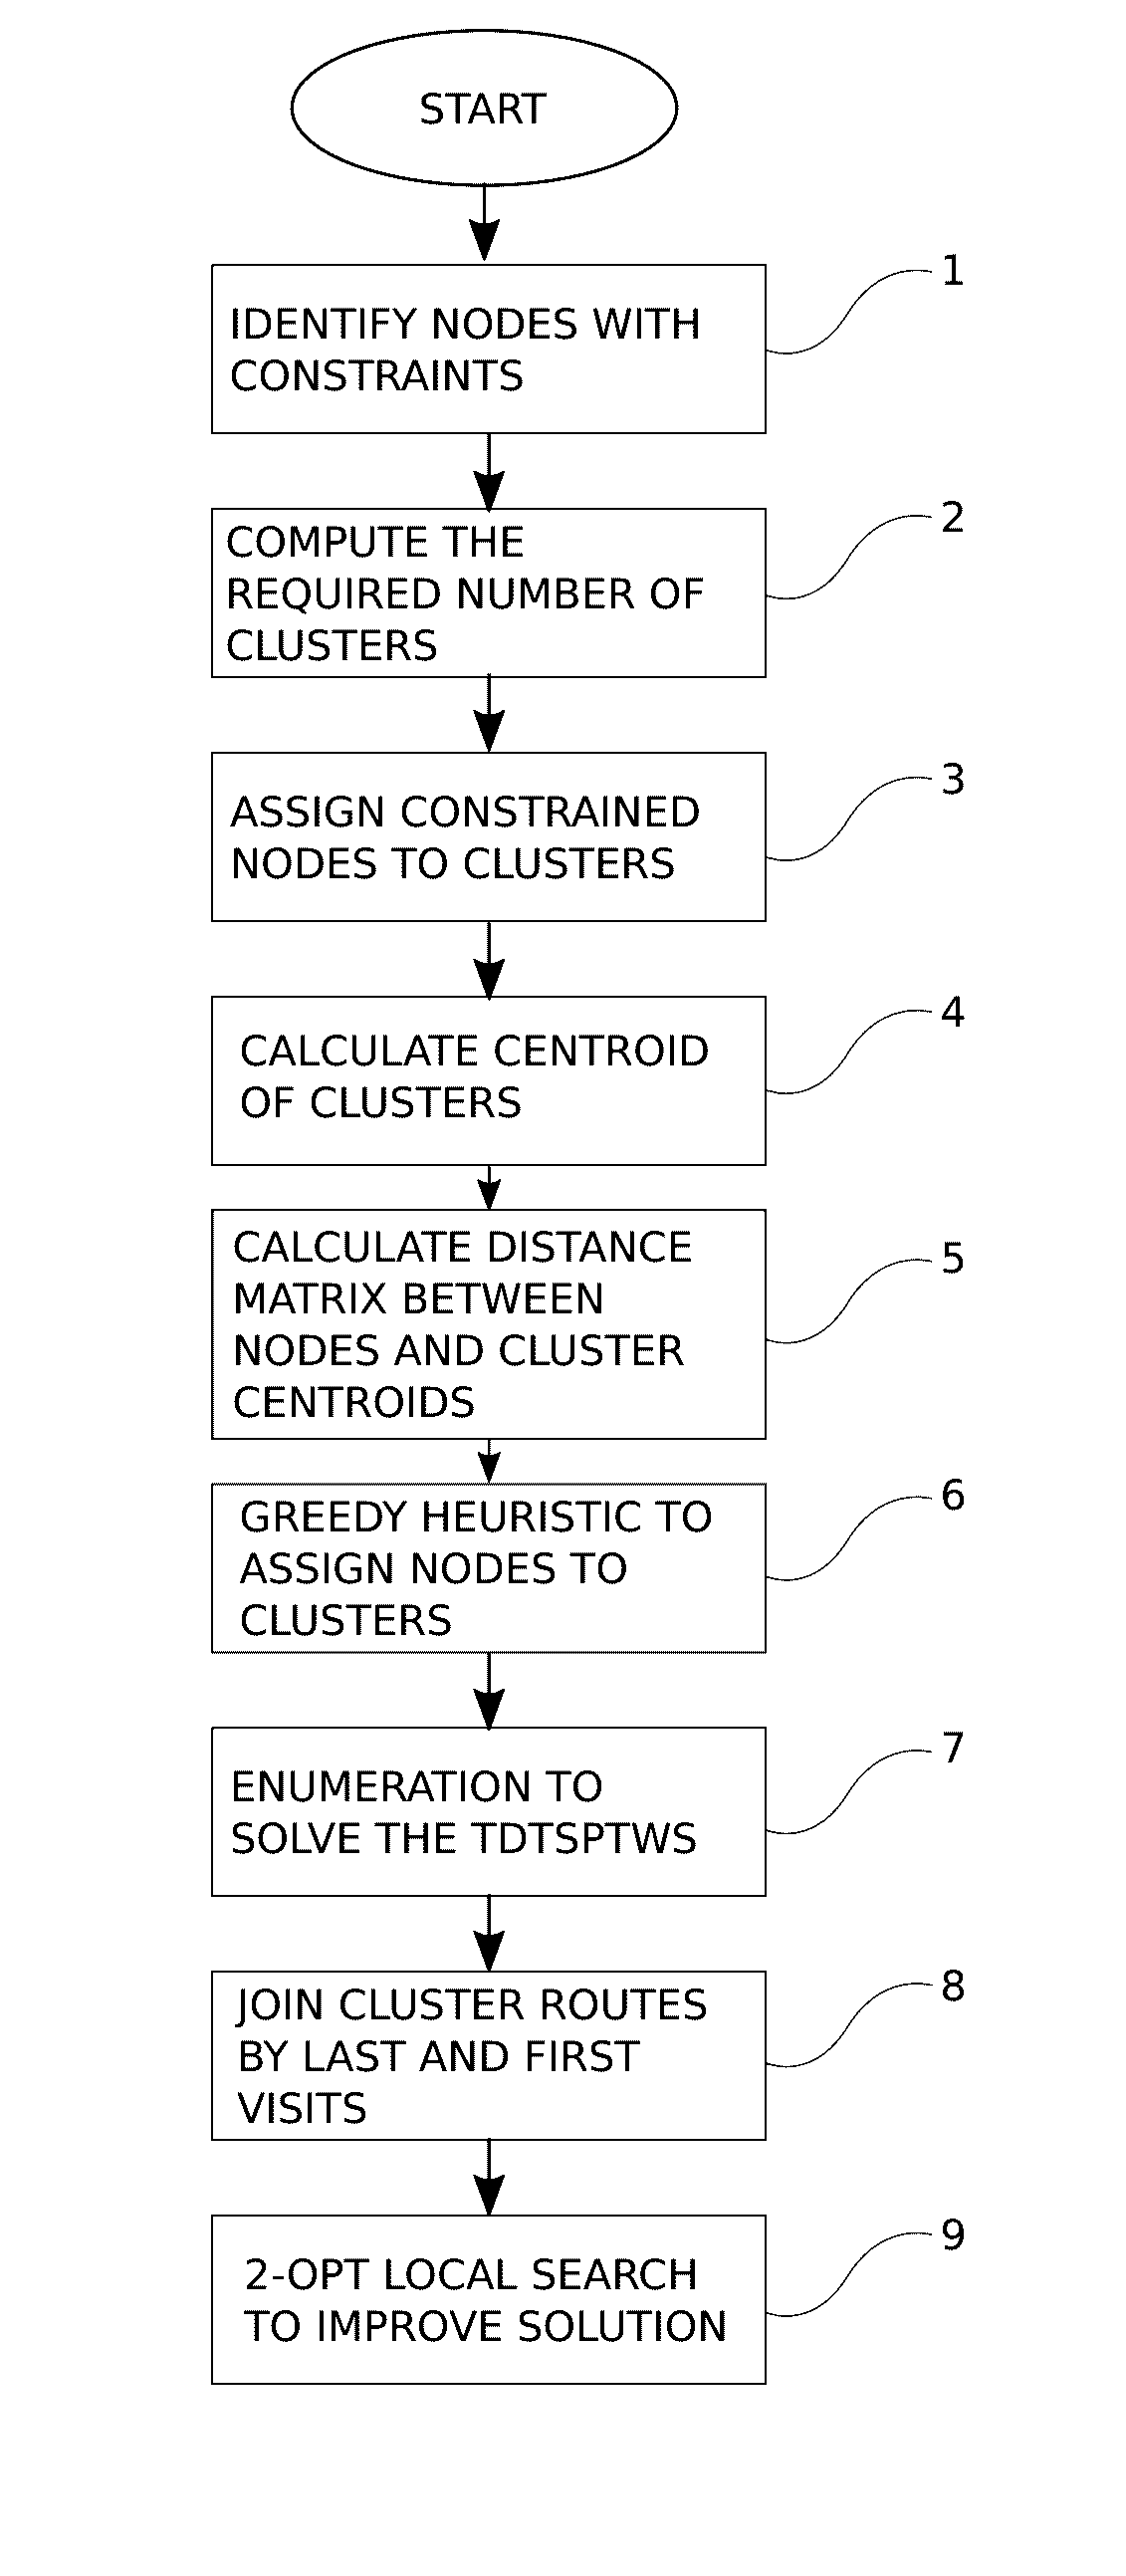 Method for Finding the Optimal Schedule and Route in Contrained Home Healthcare Visit Scheduling